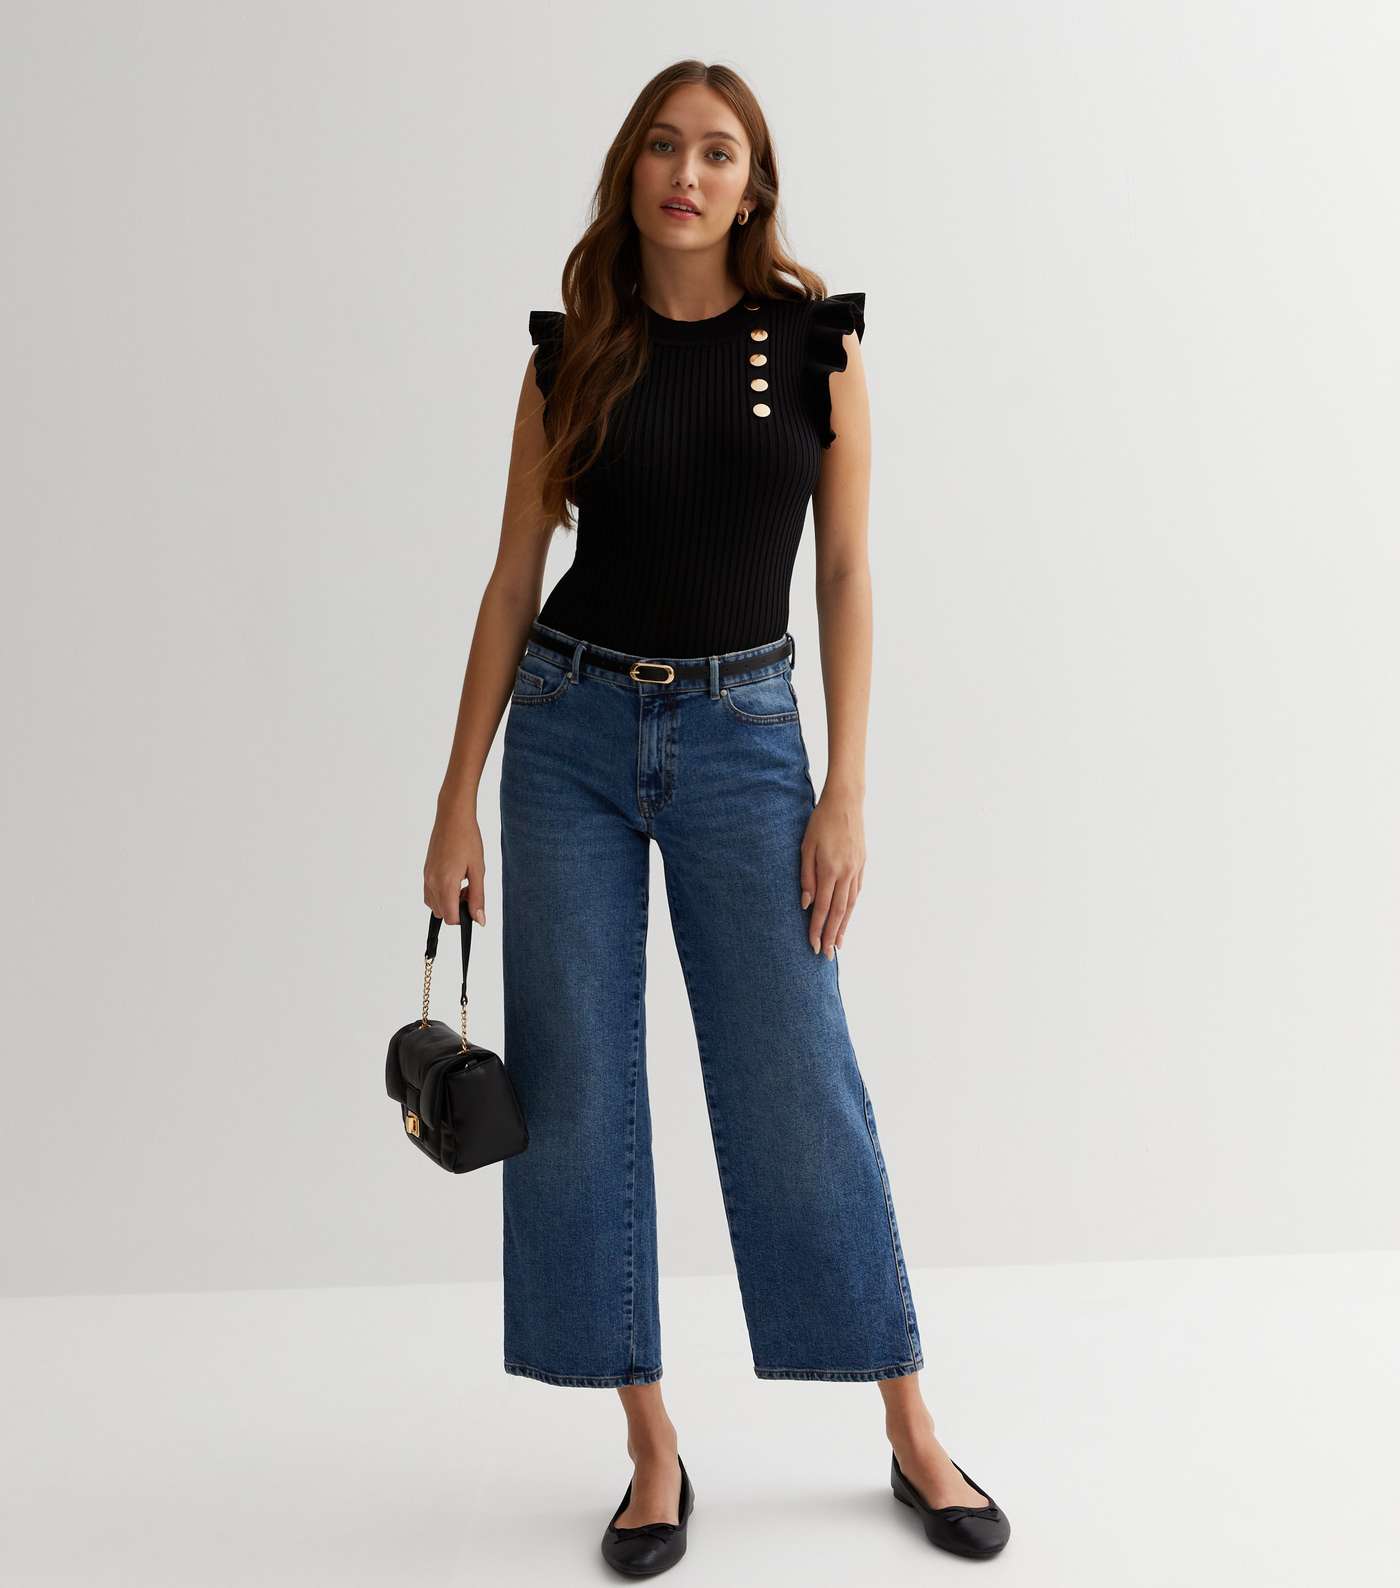 Cameo Rose Black Ribbed Knit Button Frill Top Image 2